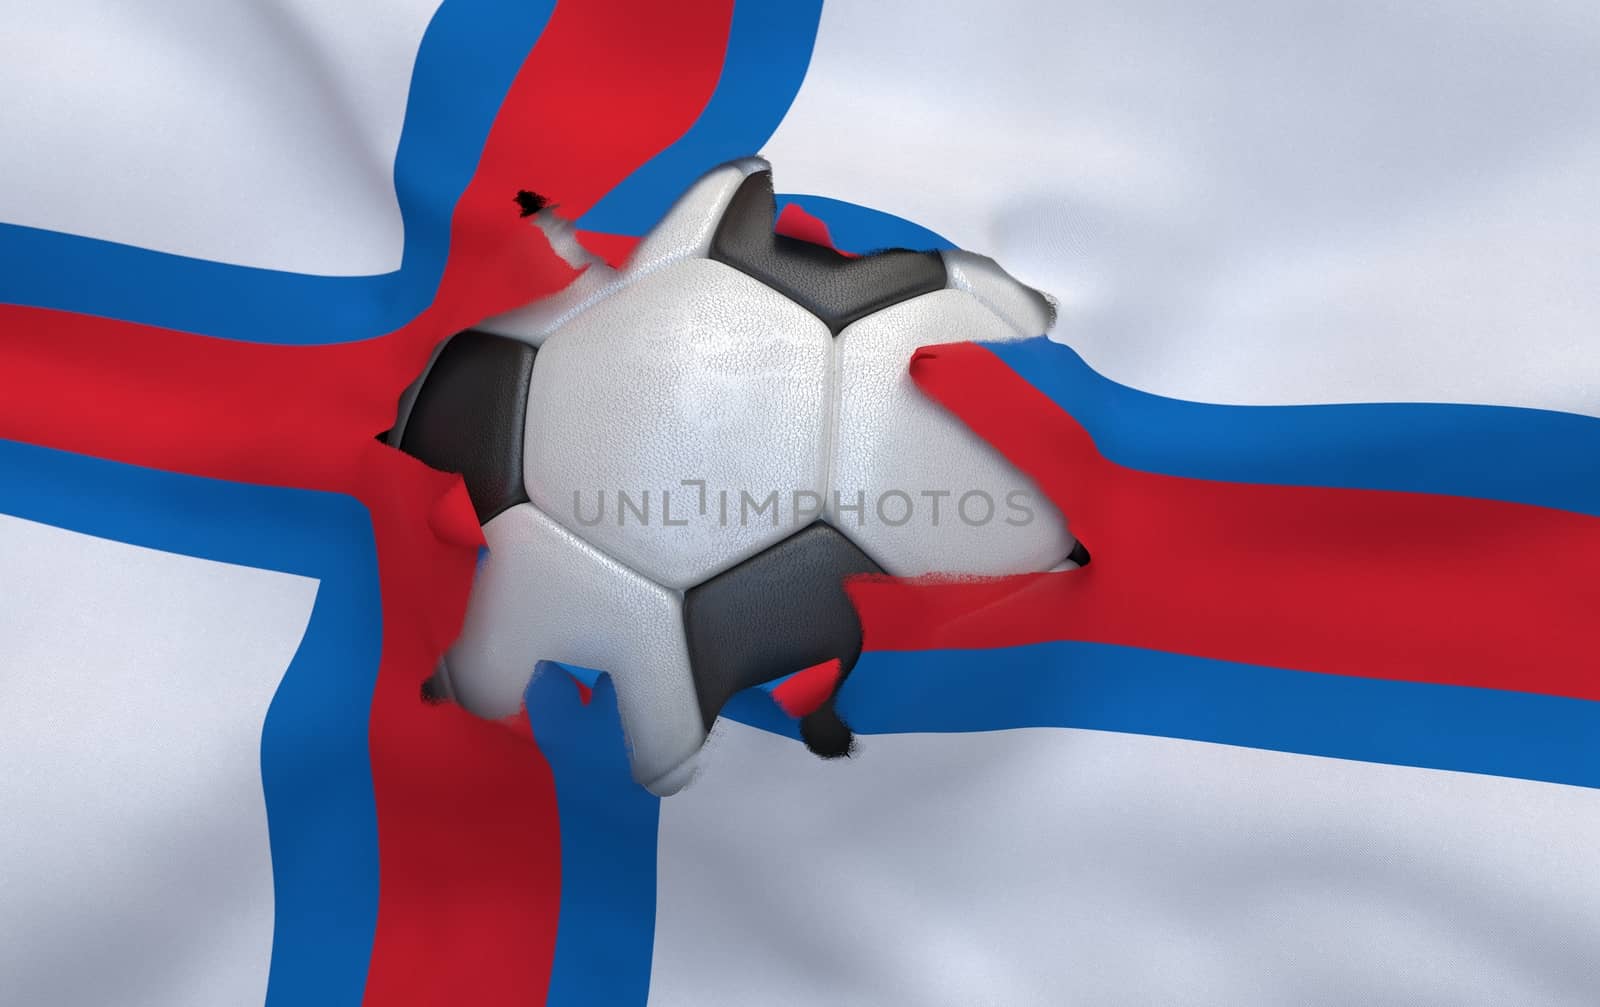 The hole in the flag of Faroe Islands and soccer ball by Barbraford